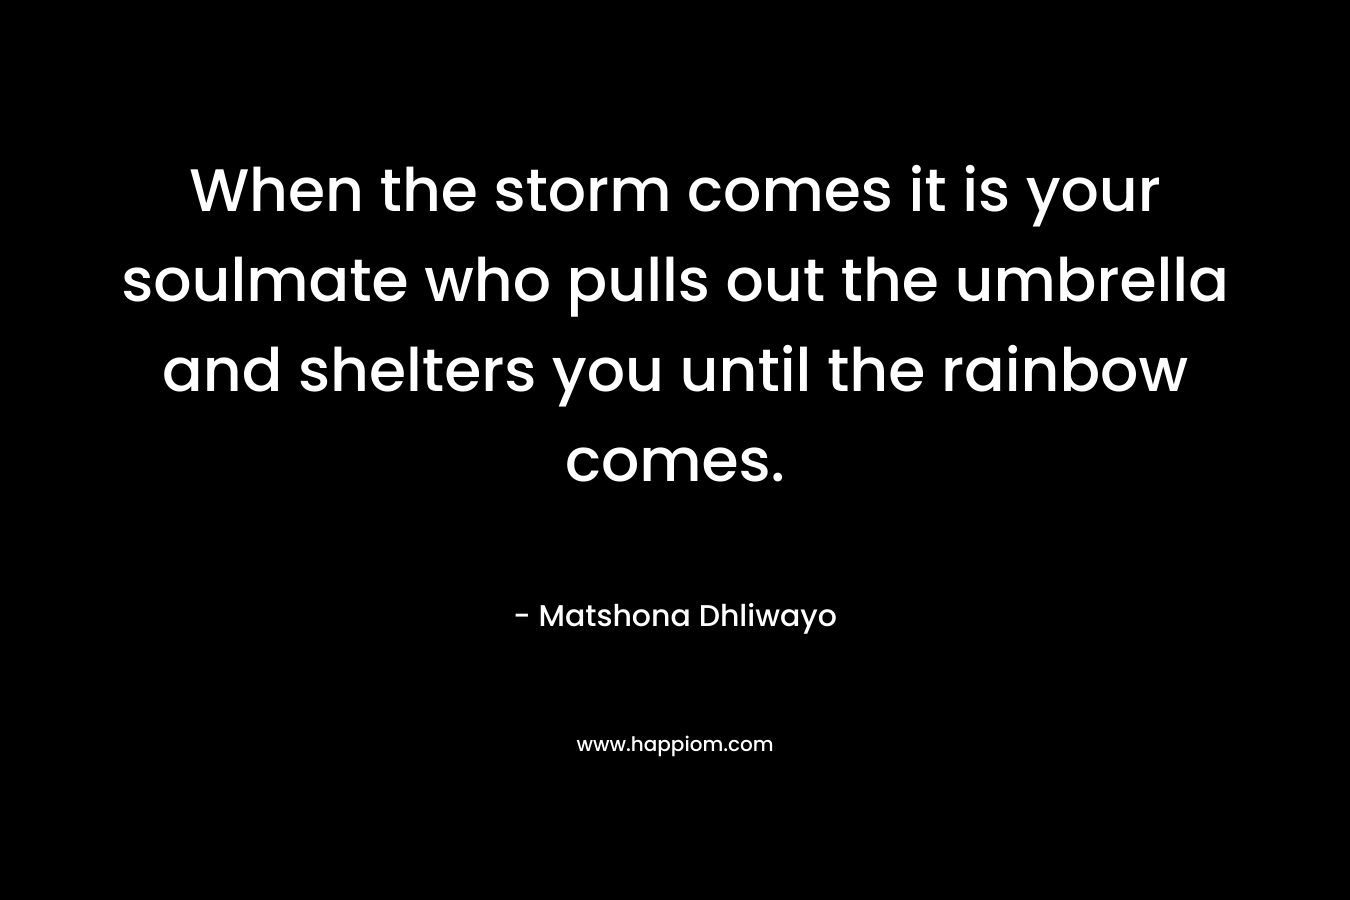 When the storm comes it is your soulmate who pulls out the umbrella and shelters you until the rainbow comes. – Matshona Dhliwayo